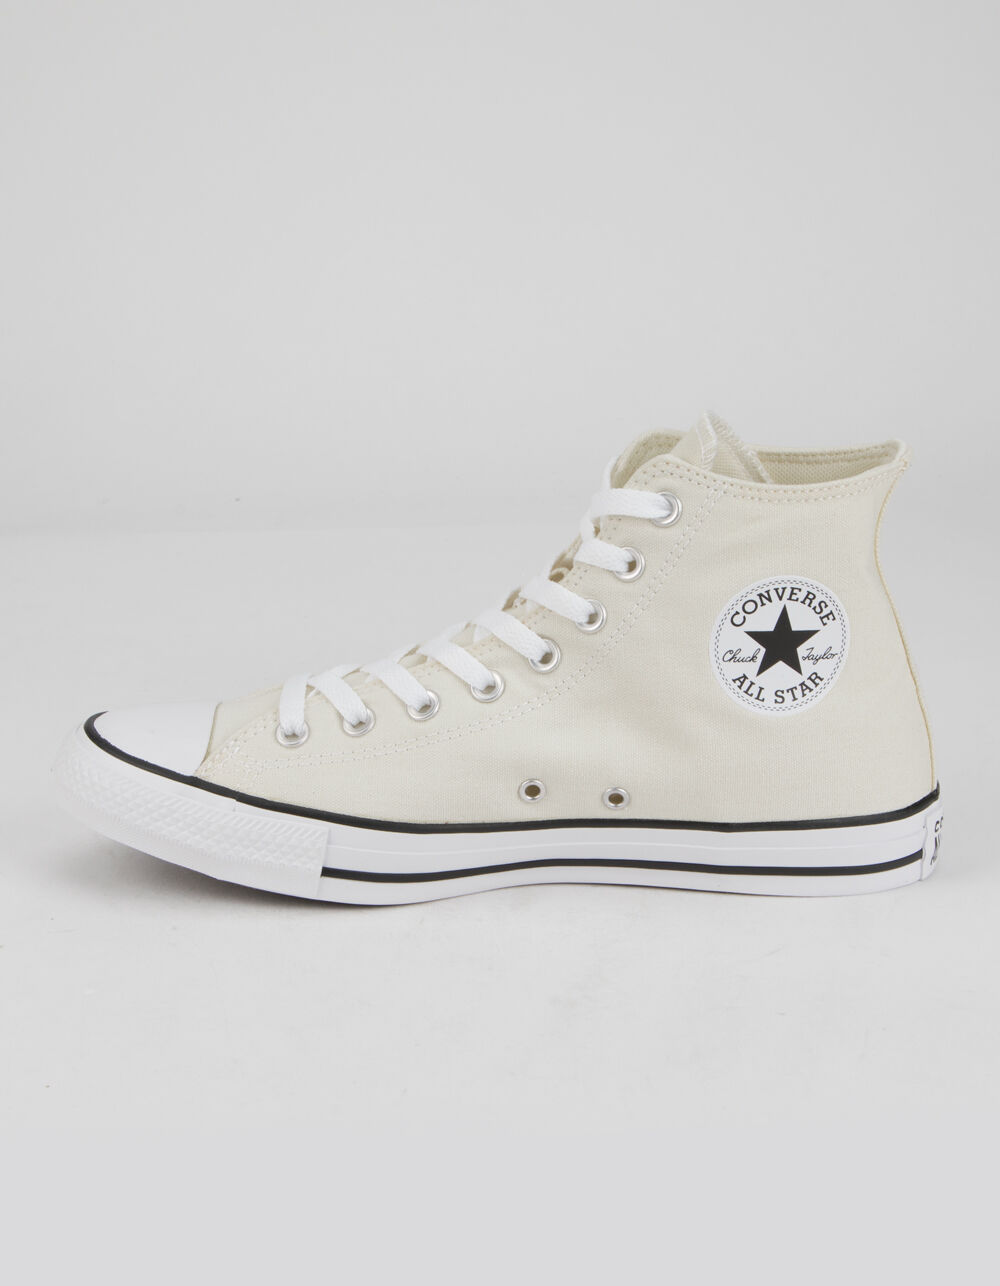 CONVERSE Cheerful Chuck Taylor All Star Egret High Top Shoes - EGRET ...